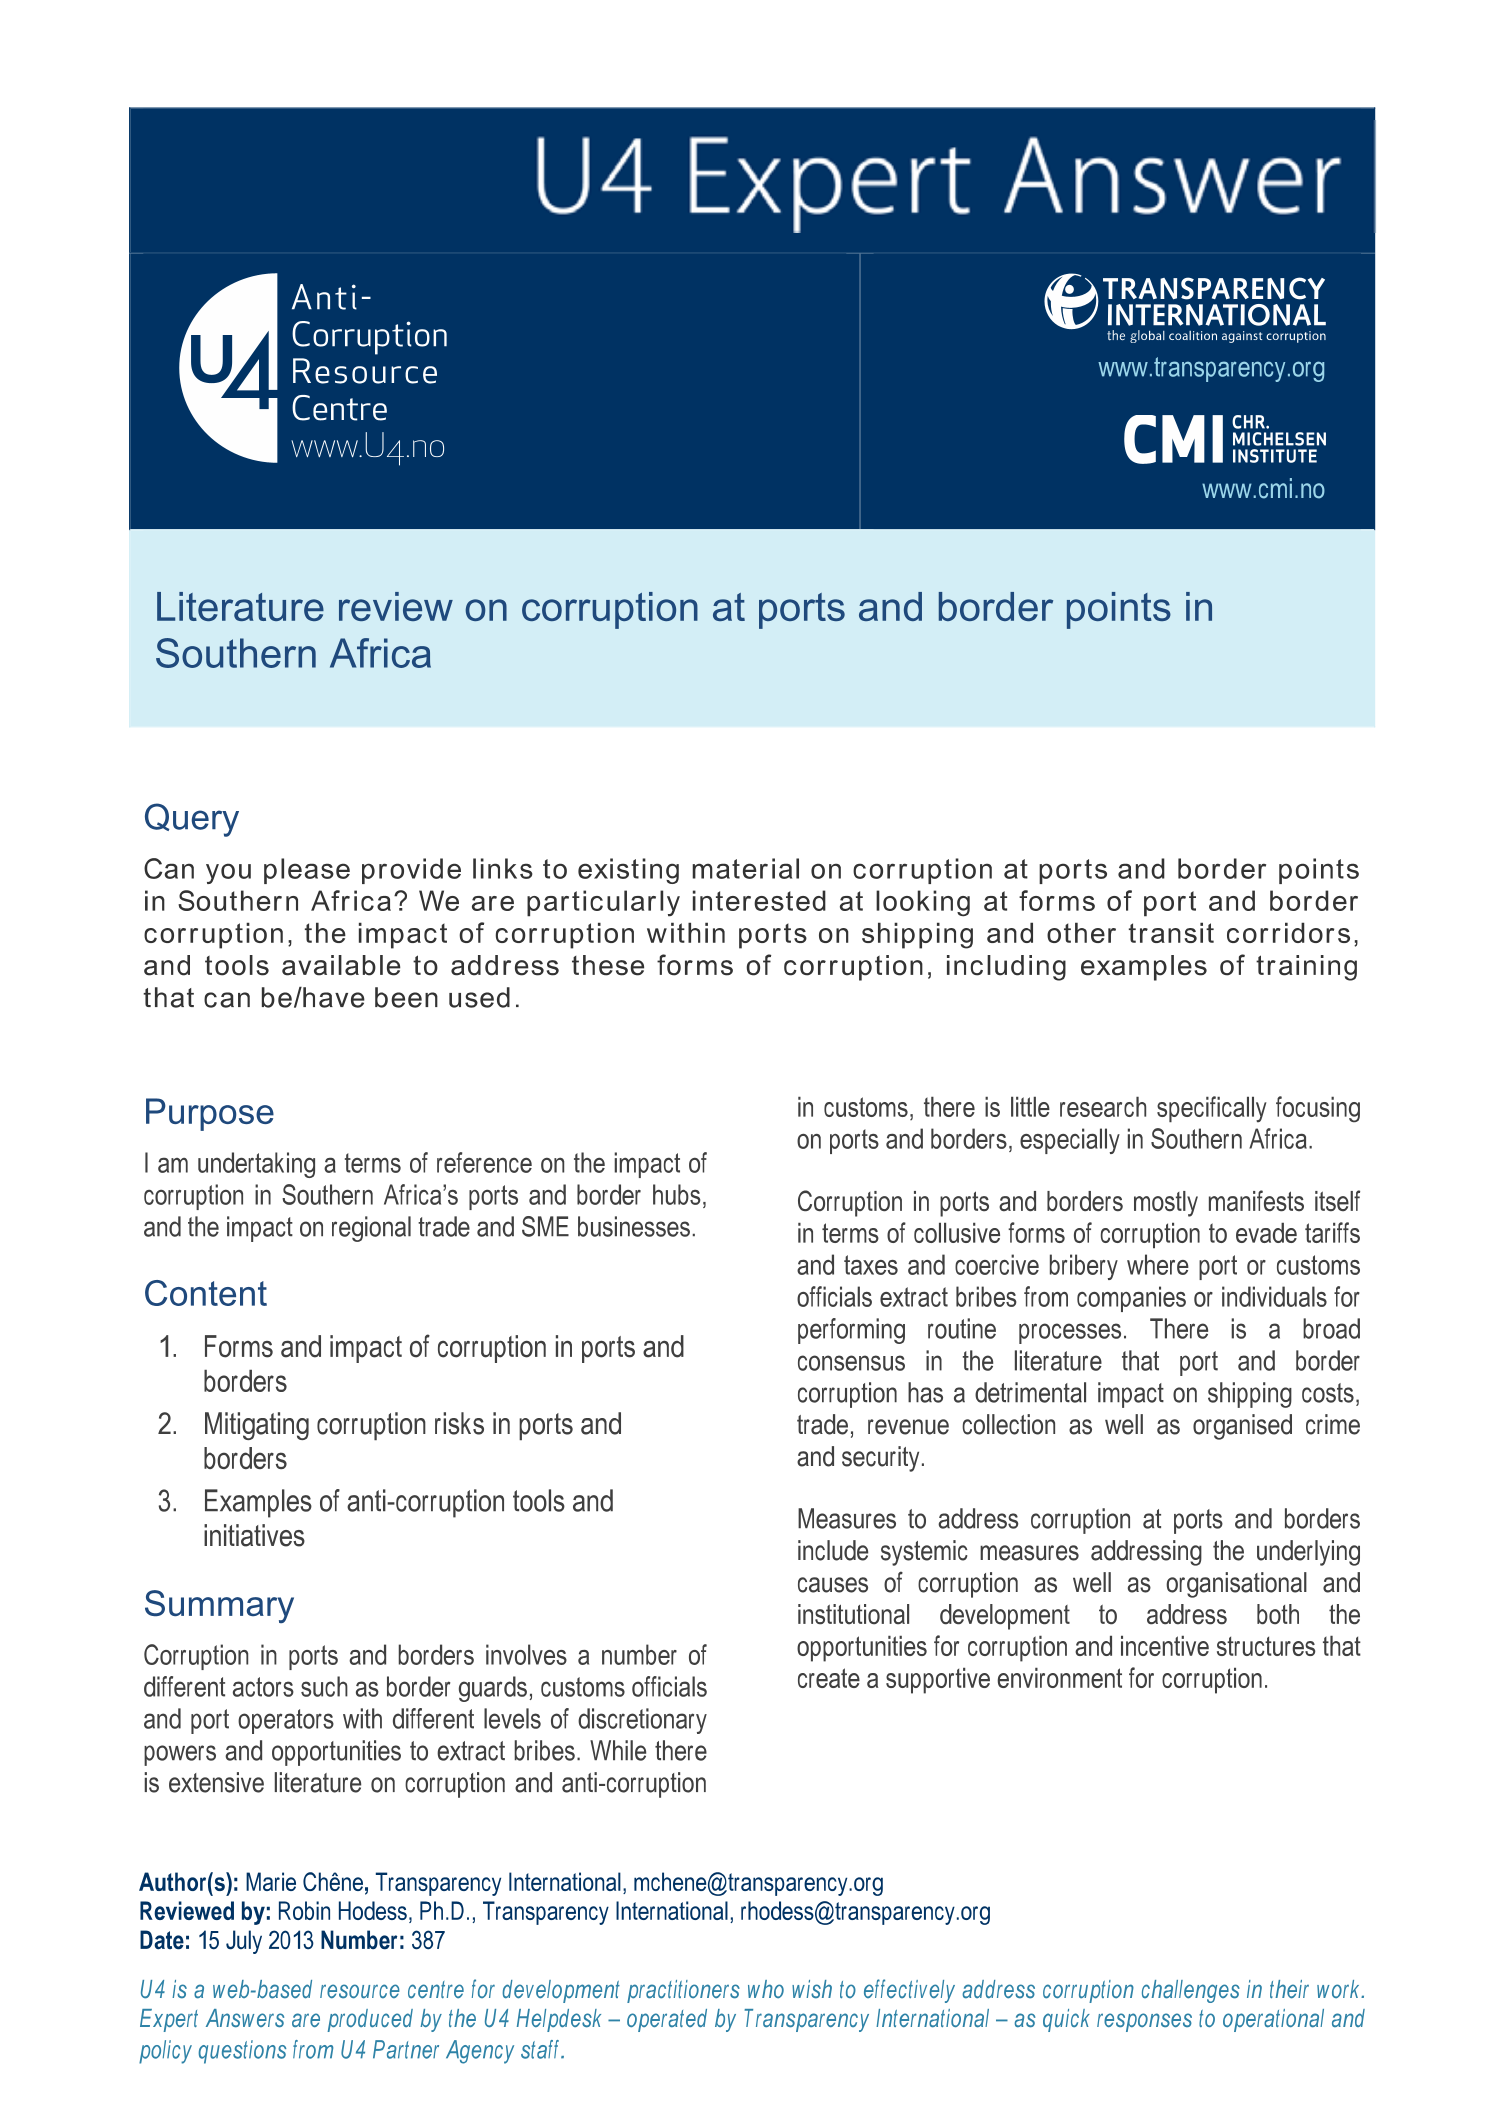 Literature review on corruption at ports and border points in Southern Africa